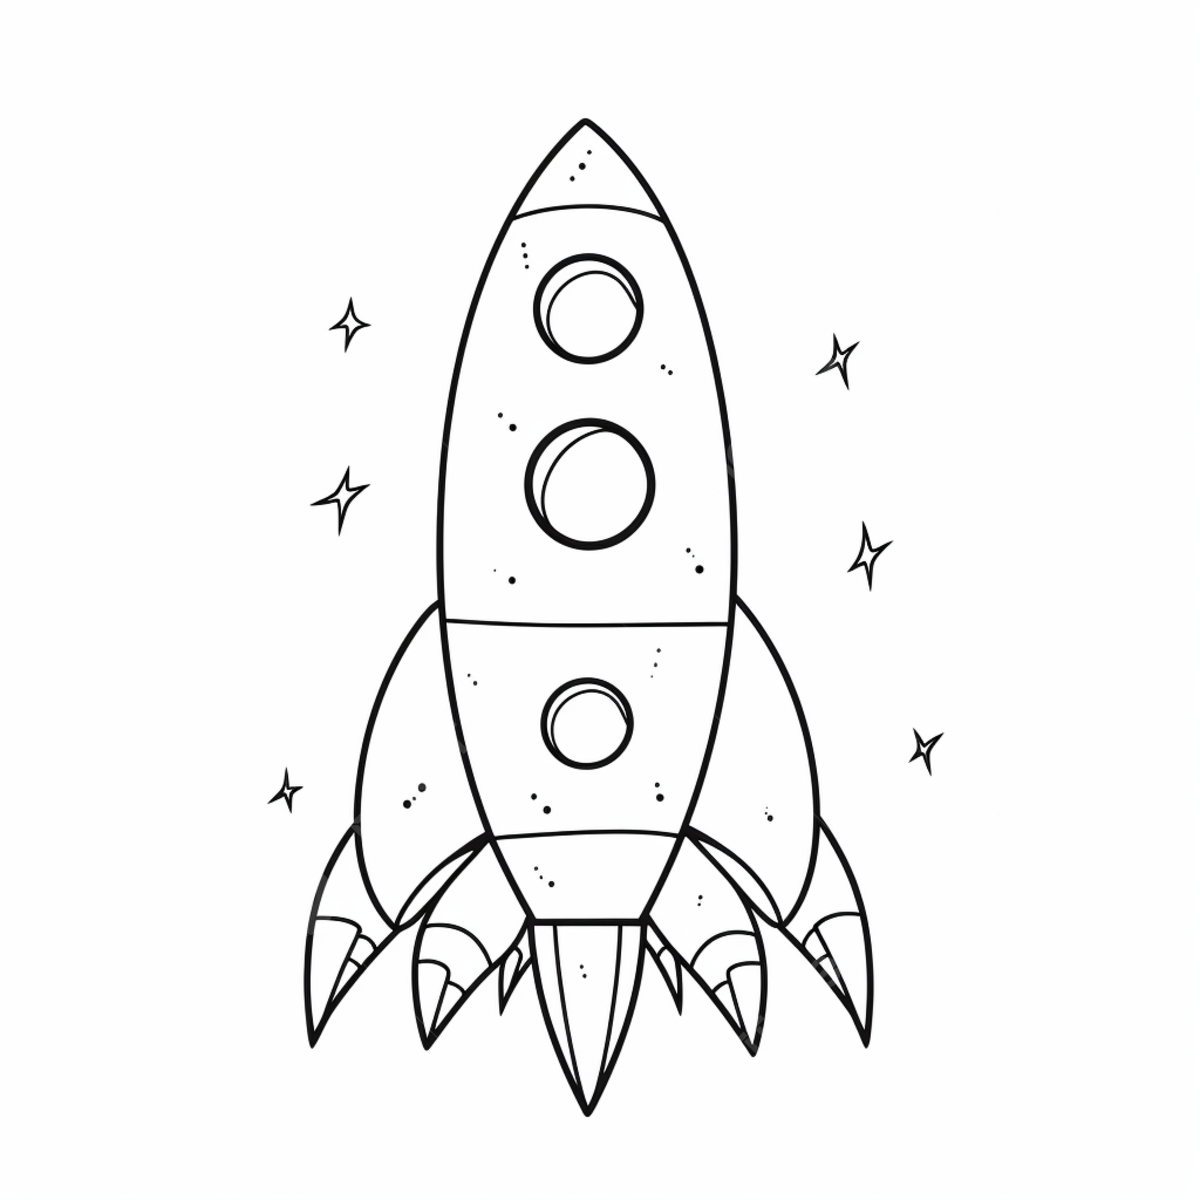 Coloring page of rocket and spaceship coloring pages space rocket coloring sheets space rocket coloring pages space rocket tracing template spaceship drawing rocket drawing space drawing png transparent image and clipart for